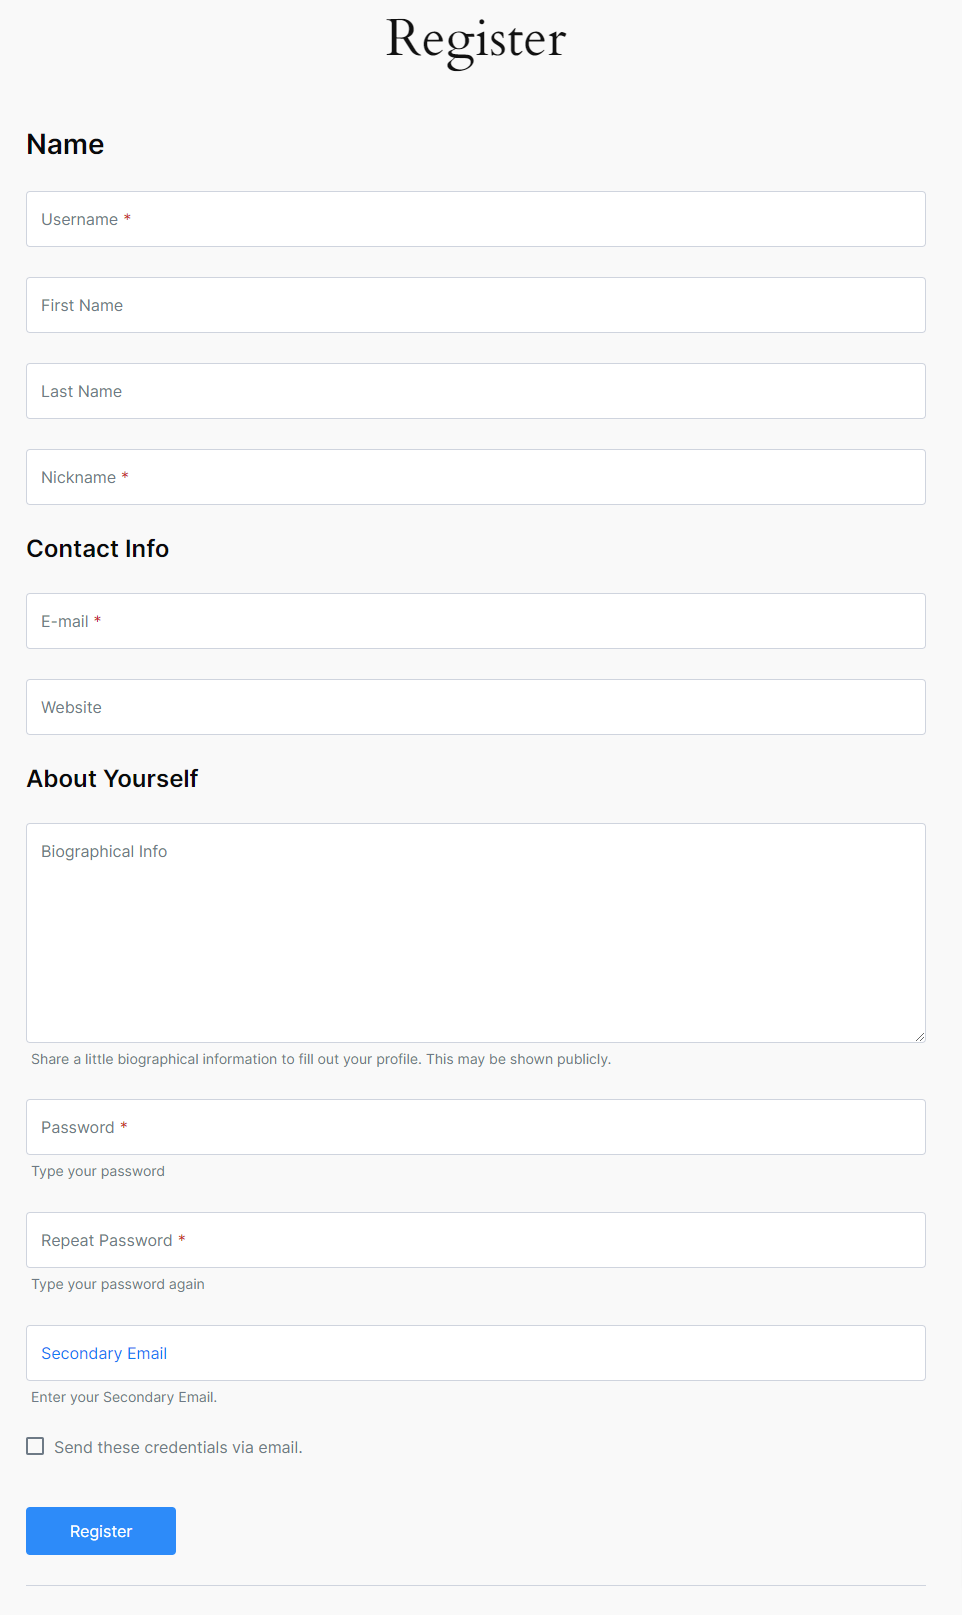 Profile-Builder-Email-Field-Front-End